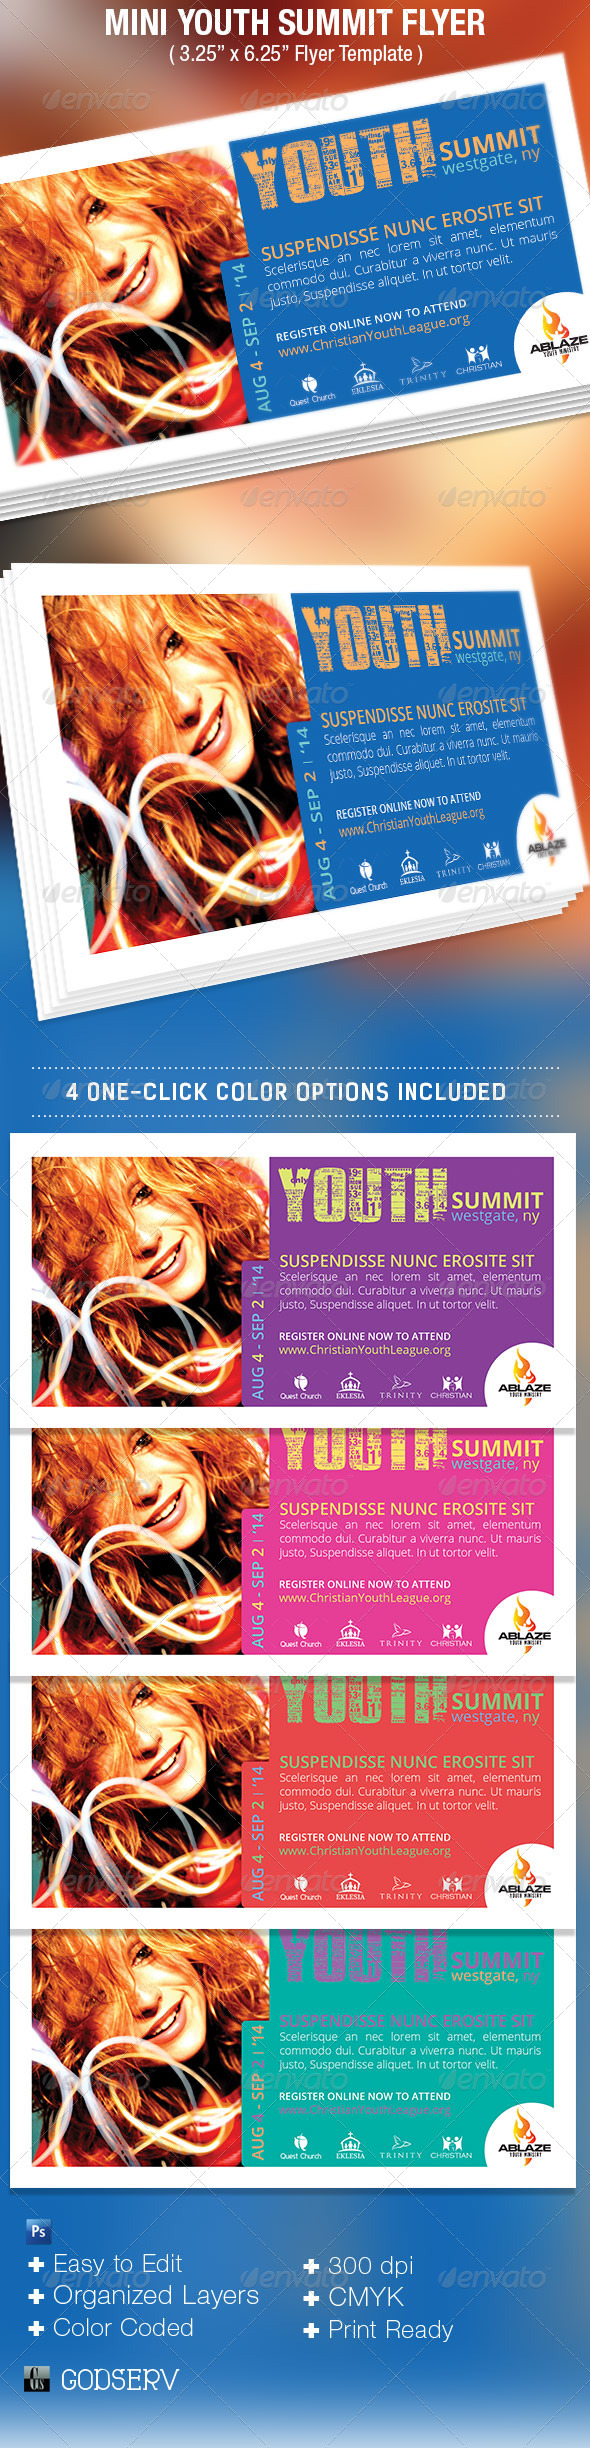 Mini-Youth-Summit-Flyer-Template-Preview